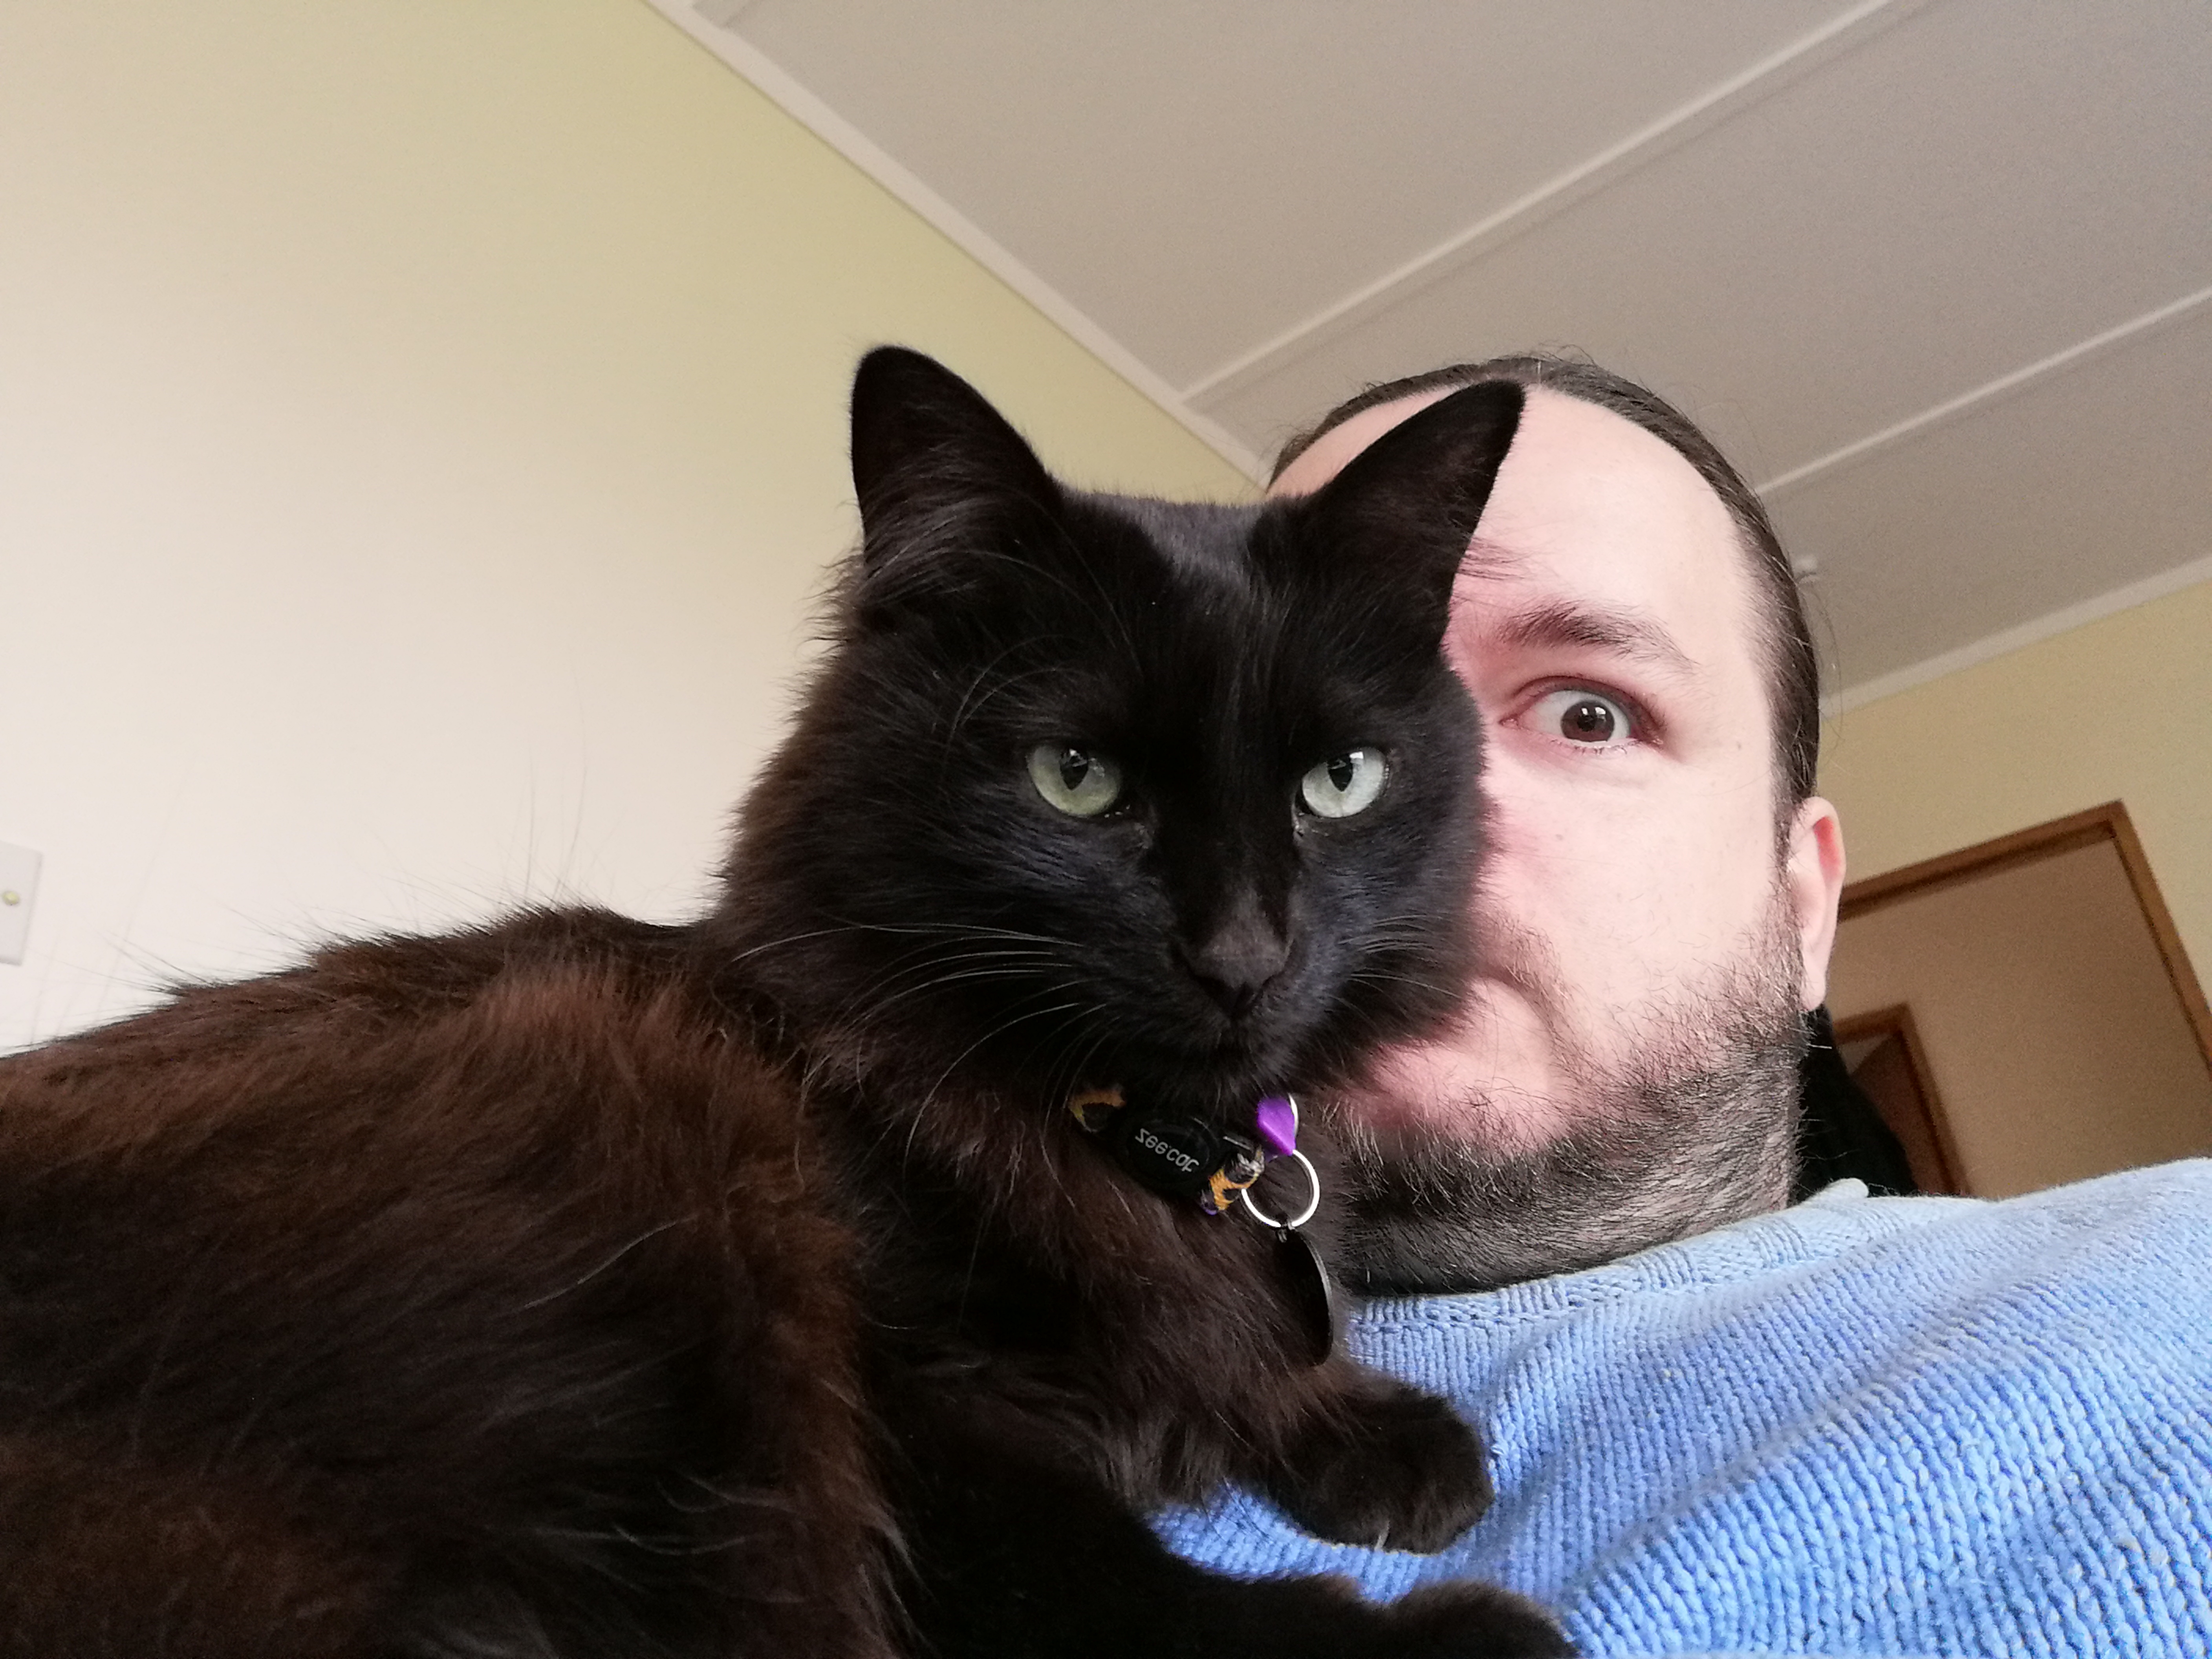 Picture of Jehferson with a black cat.